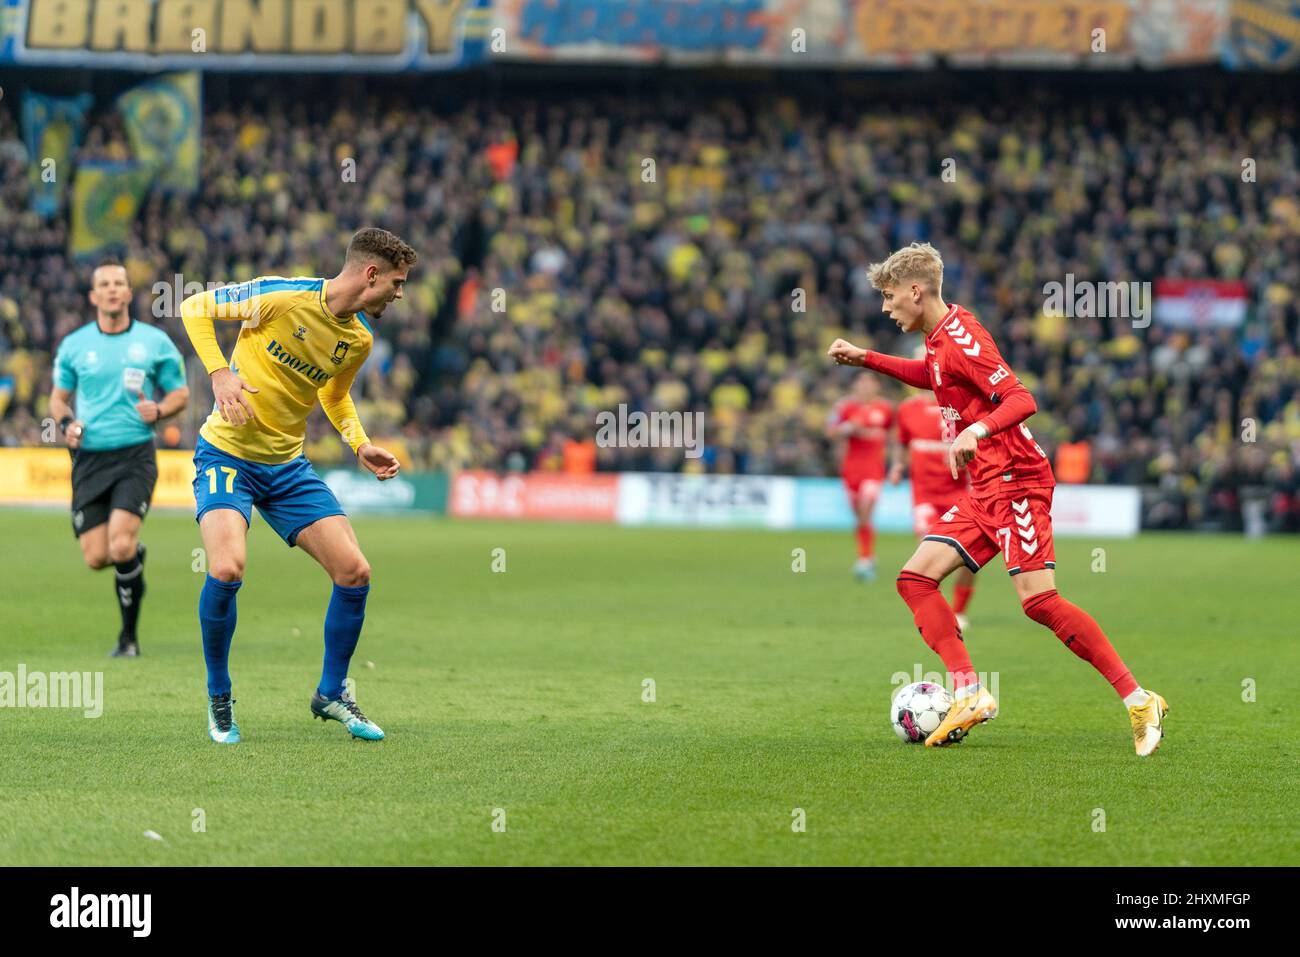 Brondby, Denmark. 13th Mar, 2022. Albert Gronbaek (27) of Aarhus GF and Andreas Bruus (17) of Broendby IF seen during the 3F Superliga match between Broendby IF and of Aarhus GF at Brondby Stadium. (Photo Credit: Gonzales Photo/Alamy Live News Stock Photo